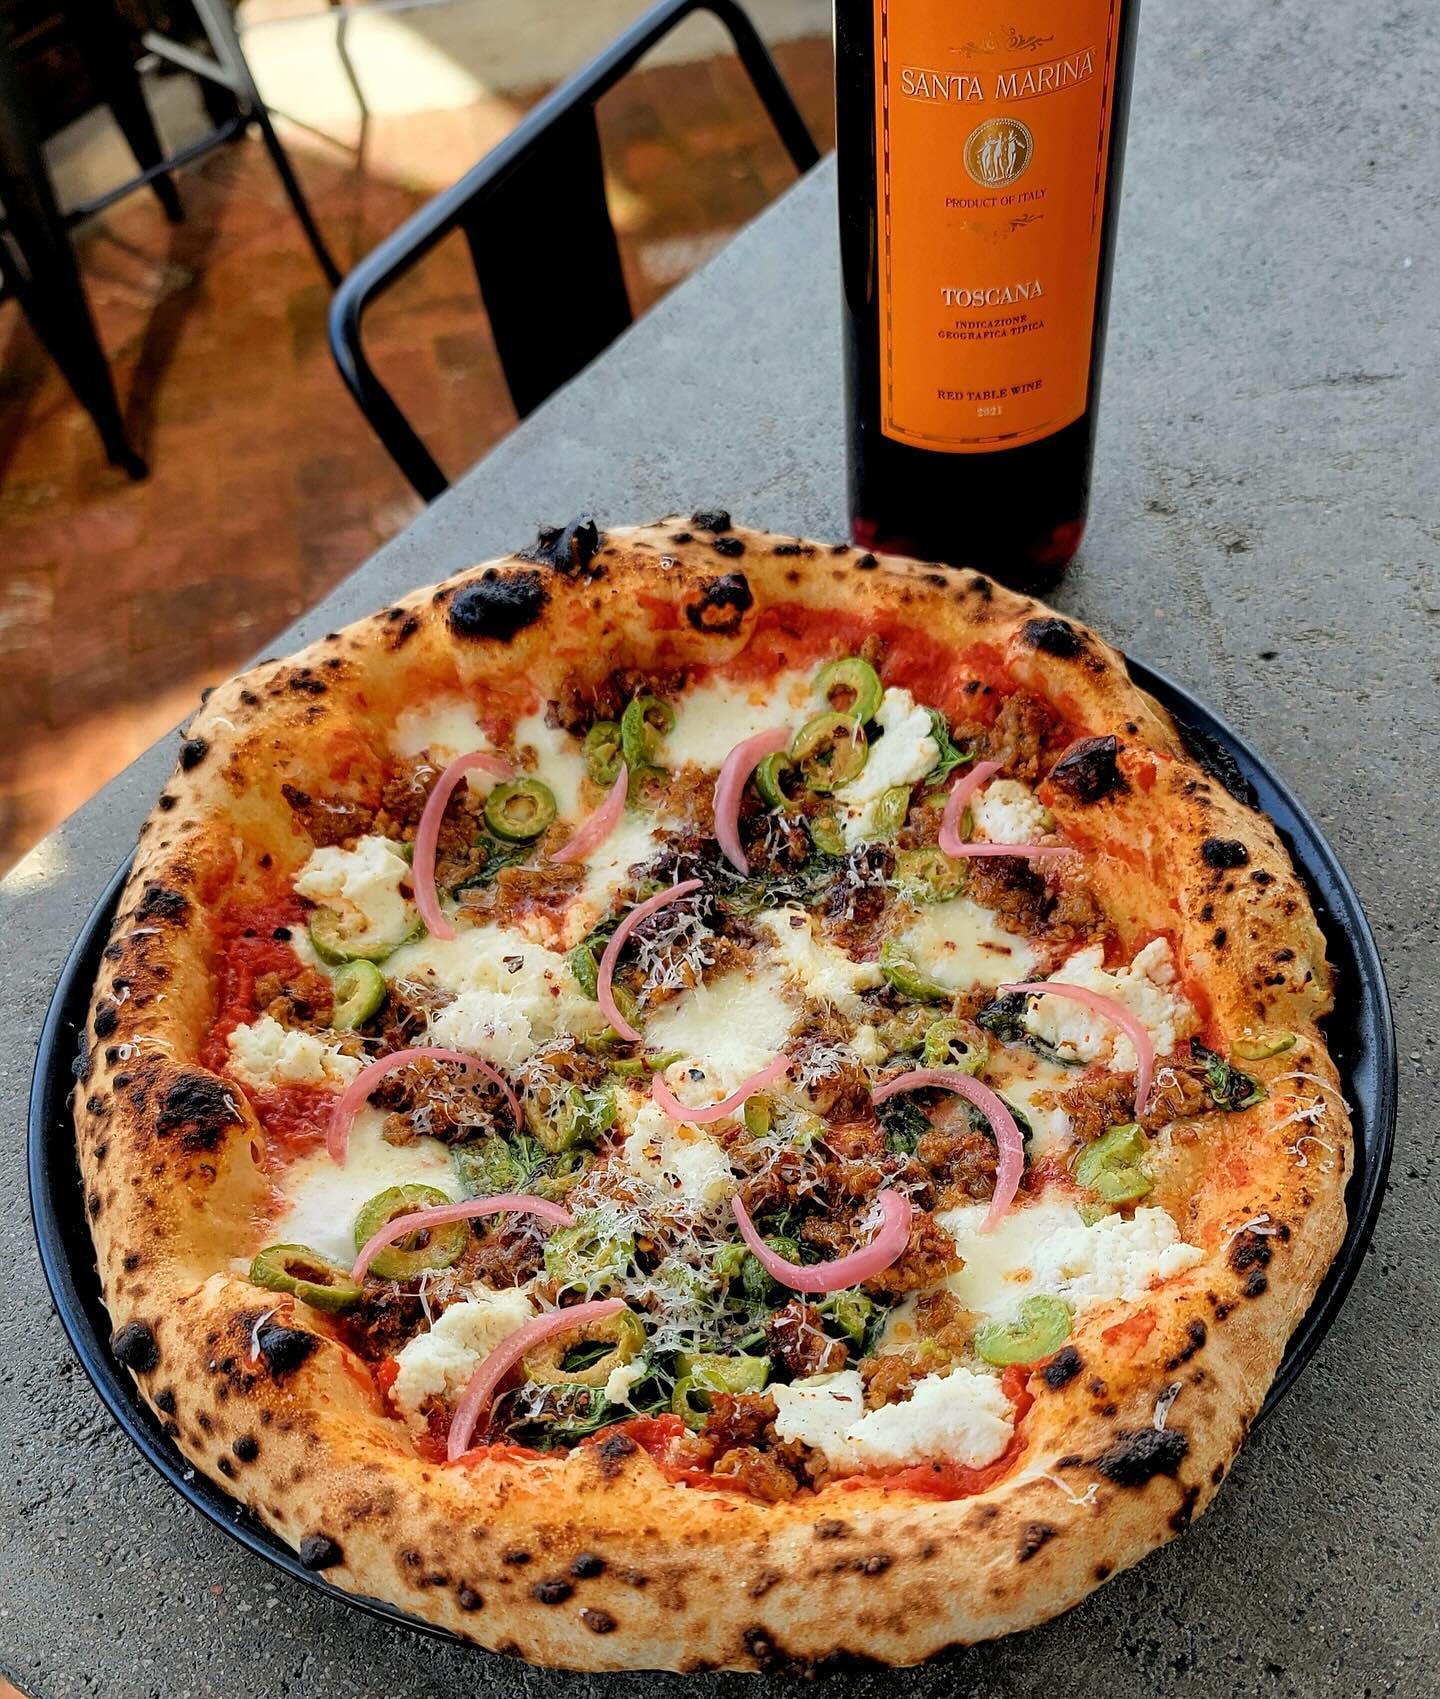 Special Wine and Pizza Pairing tonight! 🍷 🍕 

A Sausage Pizza with Marinara, Basil, Garlic, Chile Flakes, Fresh Mozzarella, Ricotta and Olives. Topped with Fresh Grated Parmesan and Pickled Onions&nbsp;🍅 🌿 🧀 🧅 

Santa Marina Toscana - Sings wit